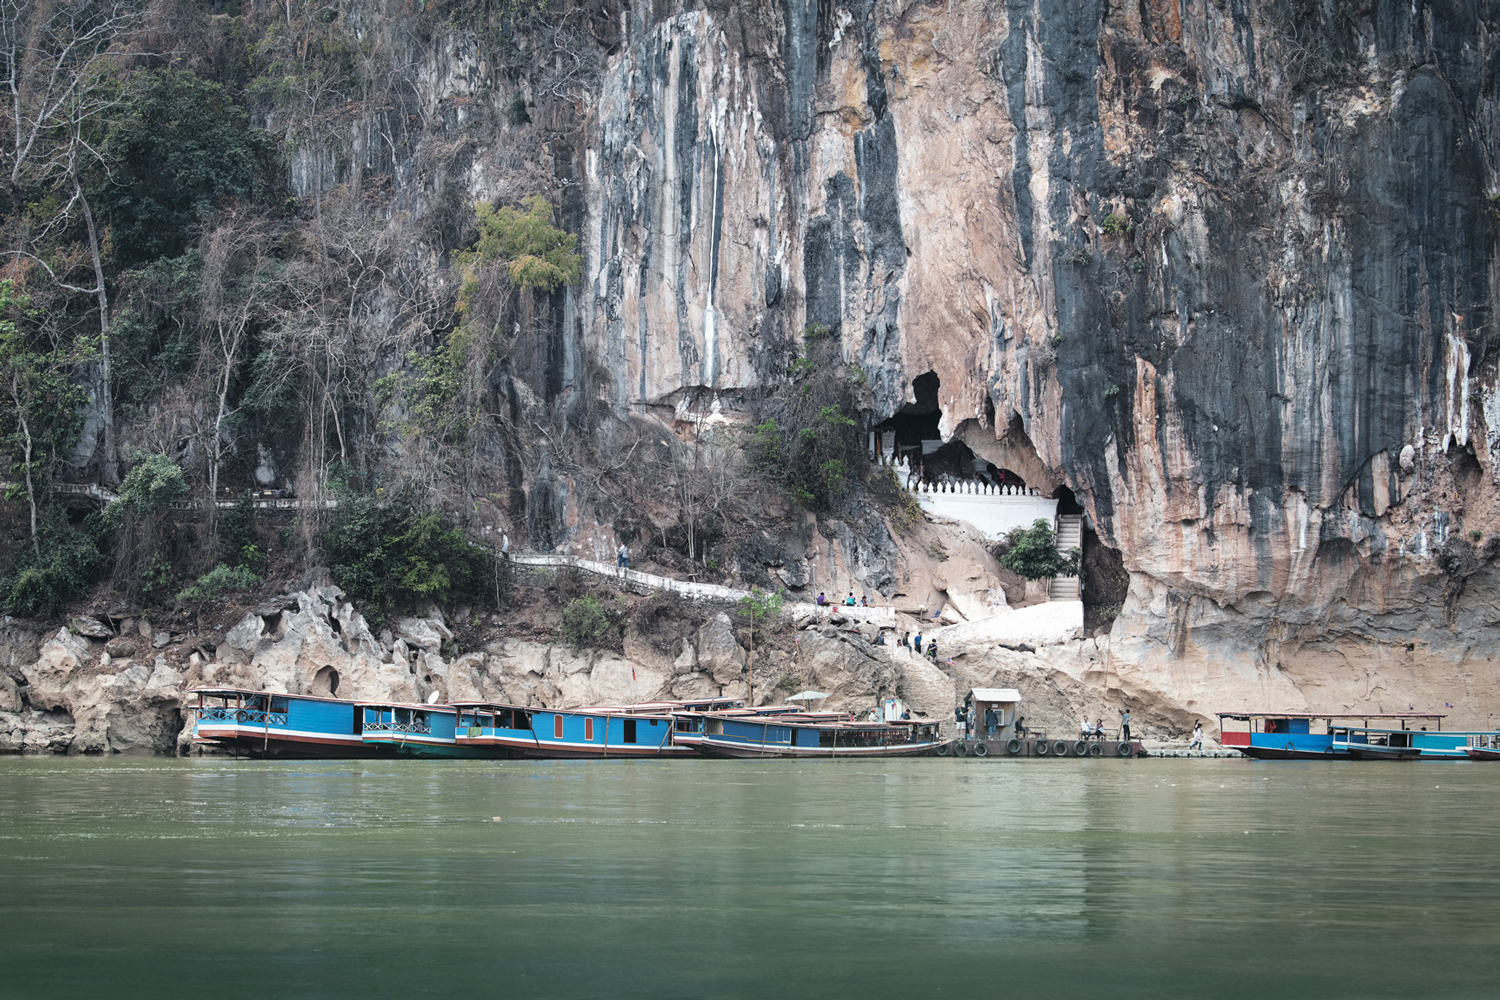 boats on the side of a cliff